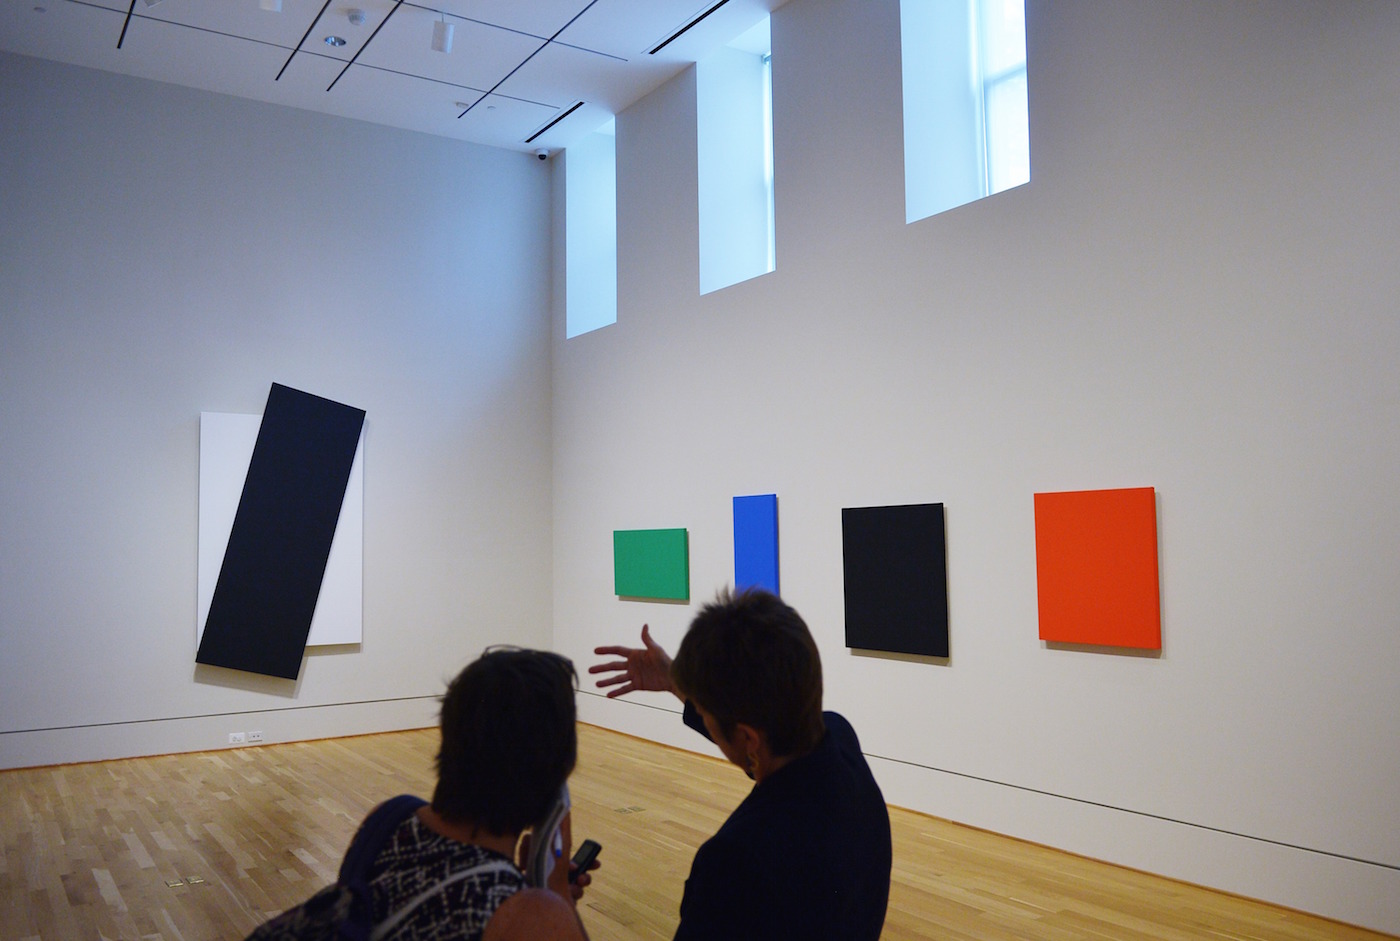 Paintings by artist Ellsworth Kelly are seen during an exhibition preview on June 19, 2013 at The Phillips Collection in Washington, DC. The exhibition, "Ellsworth Kelly: Panel Paintings 20042009" will be on display from June 22September 22, 2013. AFP PHOTO/Mandel NGAN (Photo credit should read MANDEL NGAN/AFP/Getty Images)